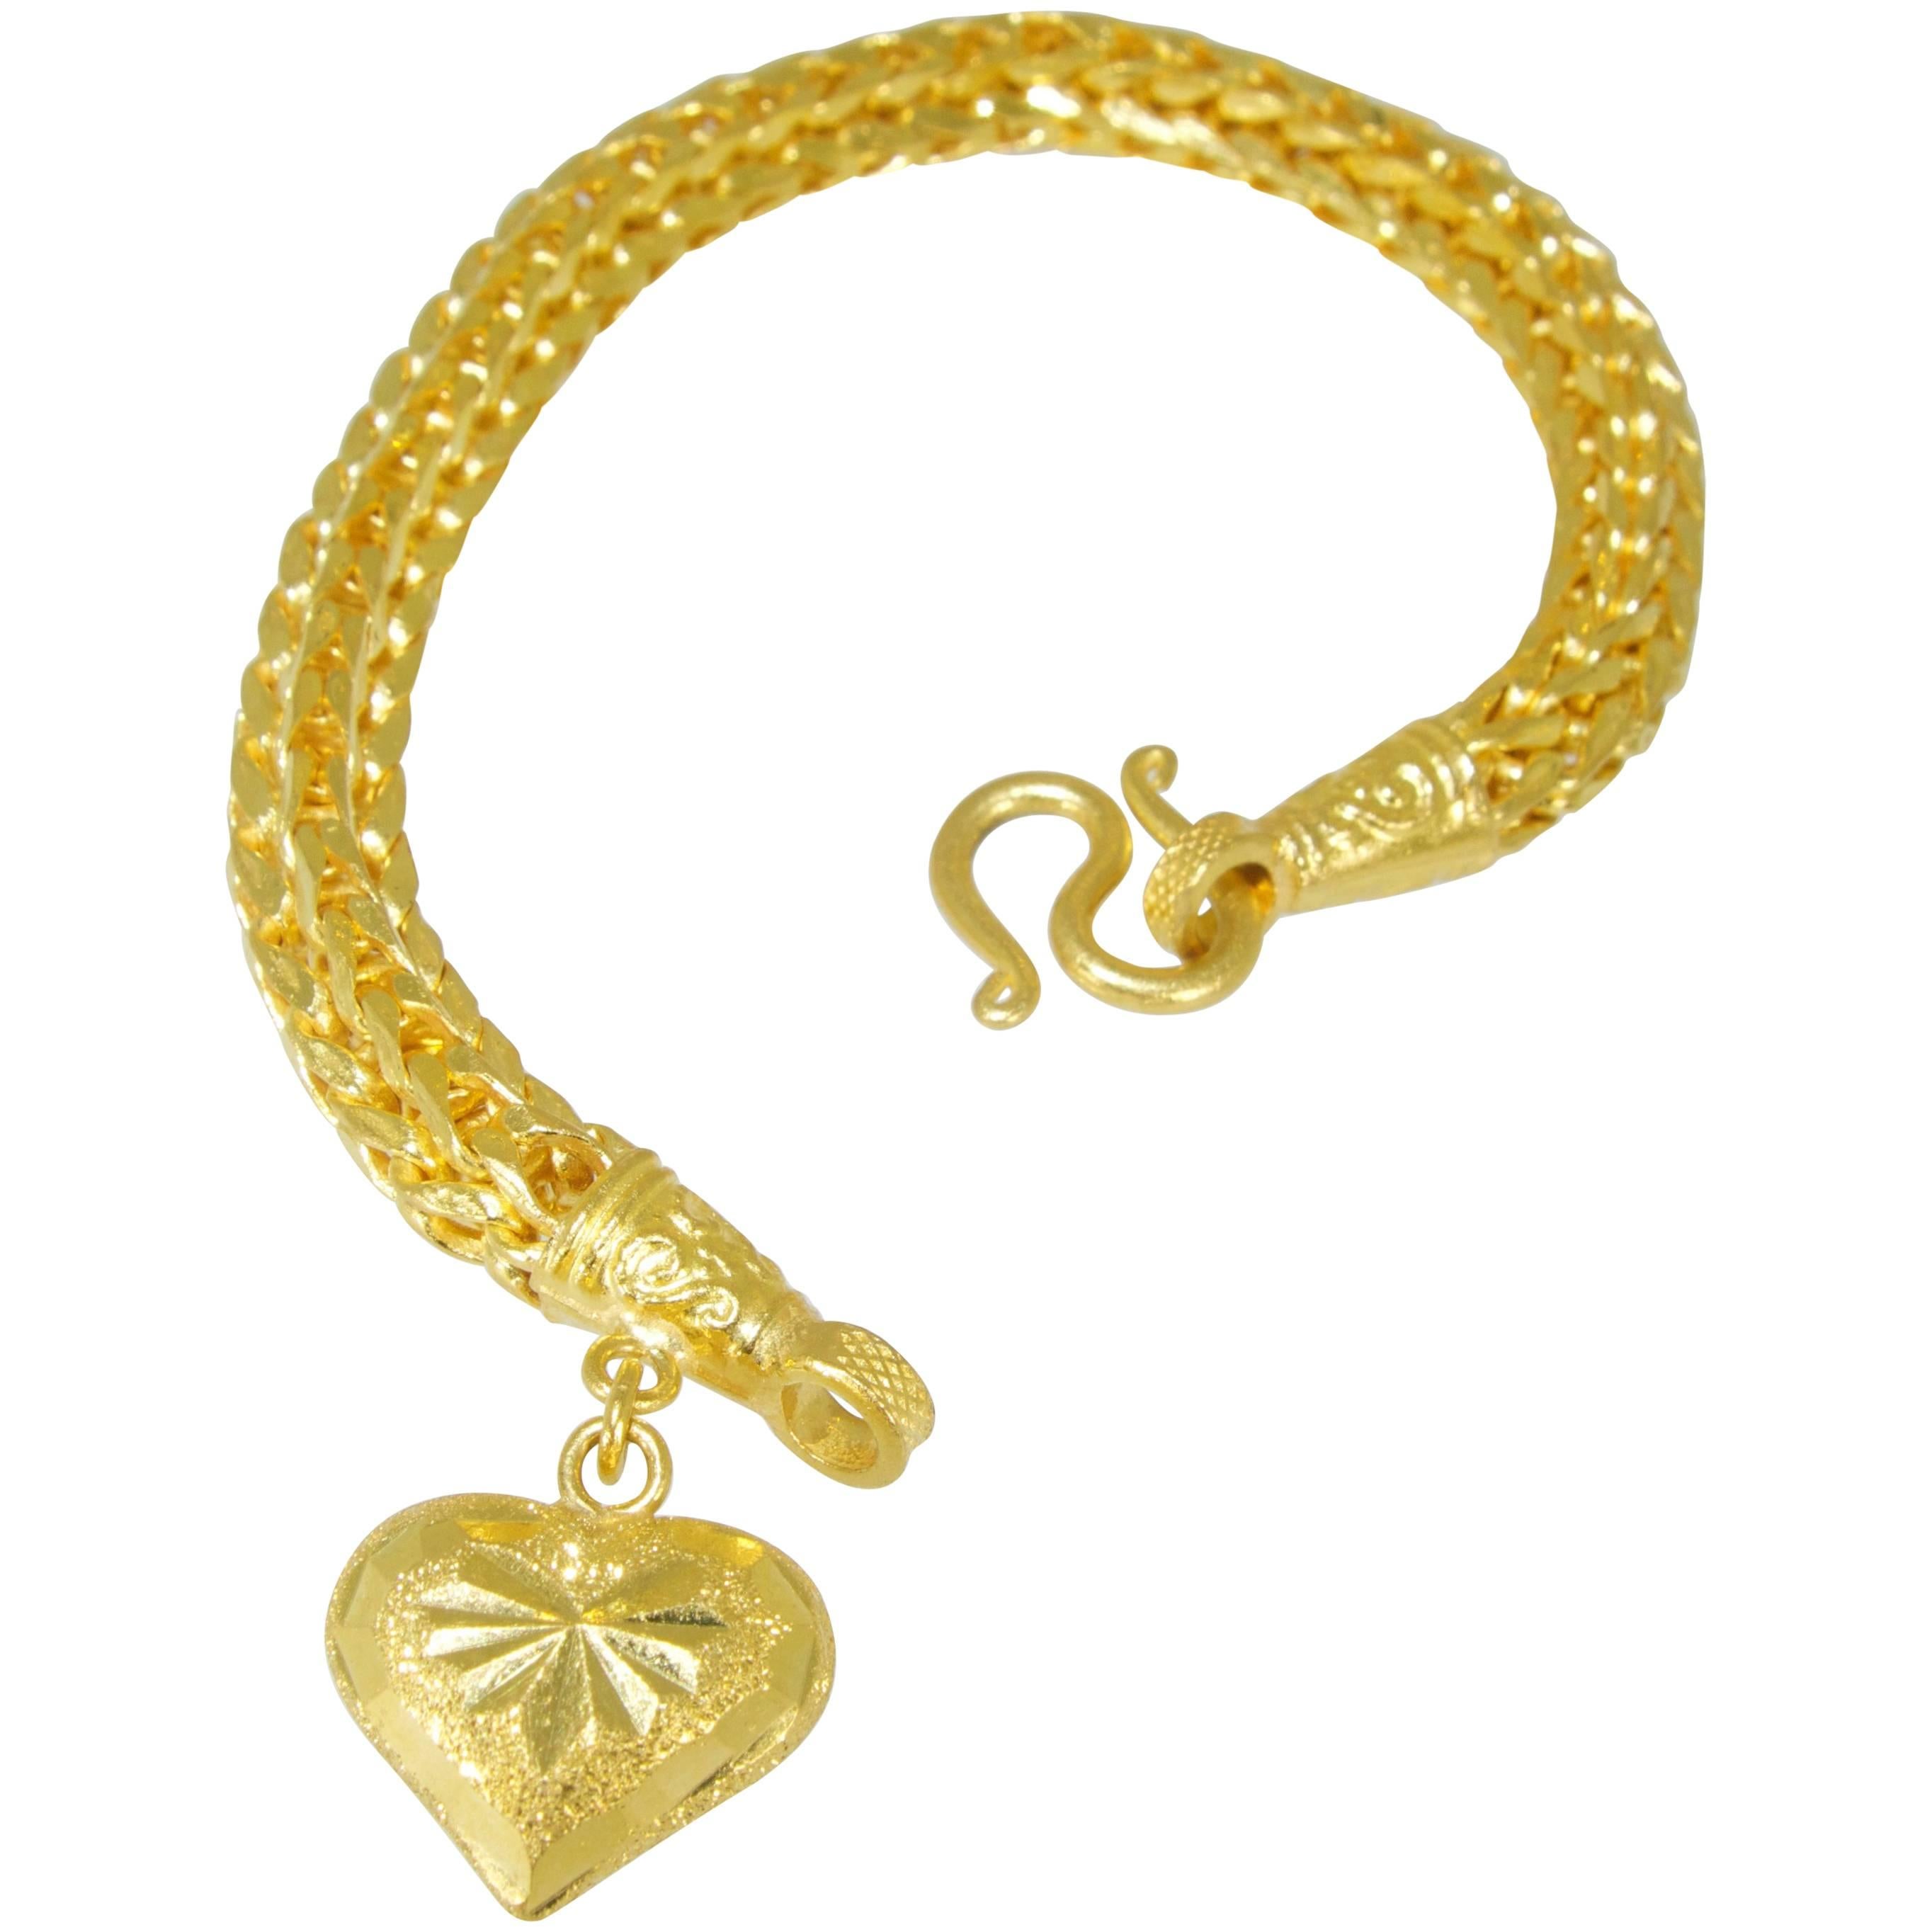 Gold Braided Bracelet with Heart Shaped Charm